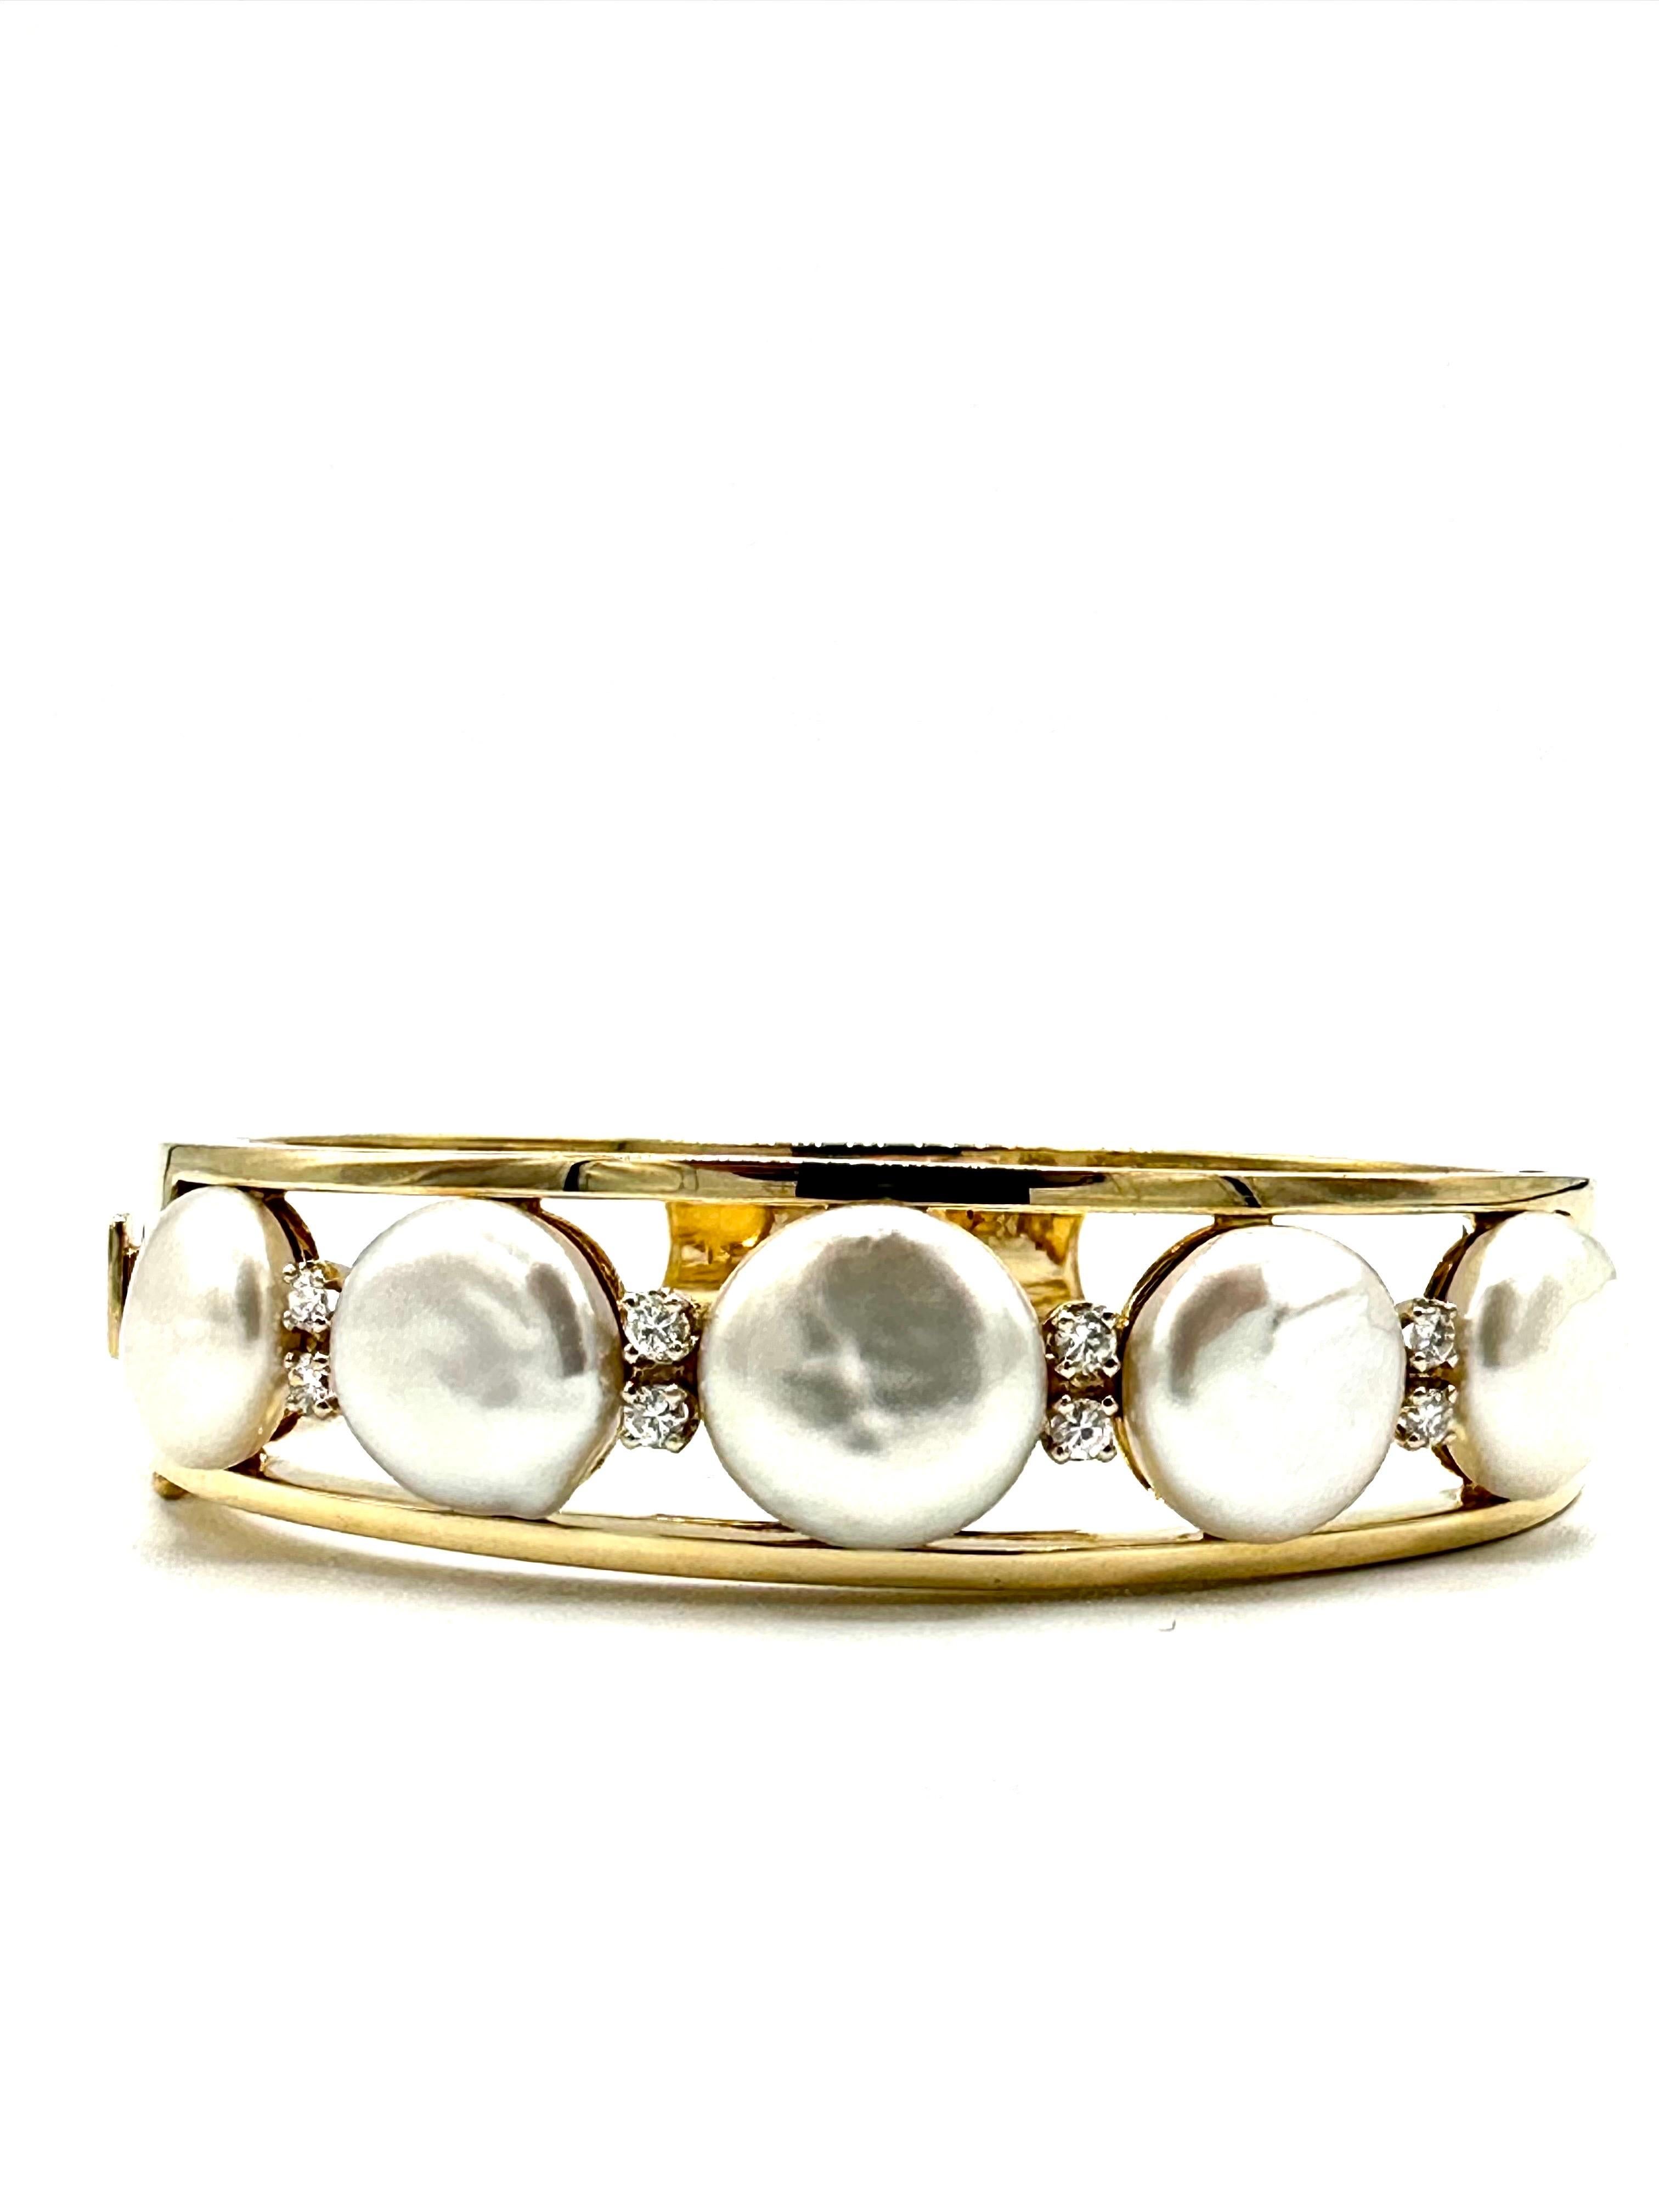 Round Cut Gumps Round Brilliant Diamond and Coin Pearl 18k Yellow Gold Bangle Bracelet